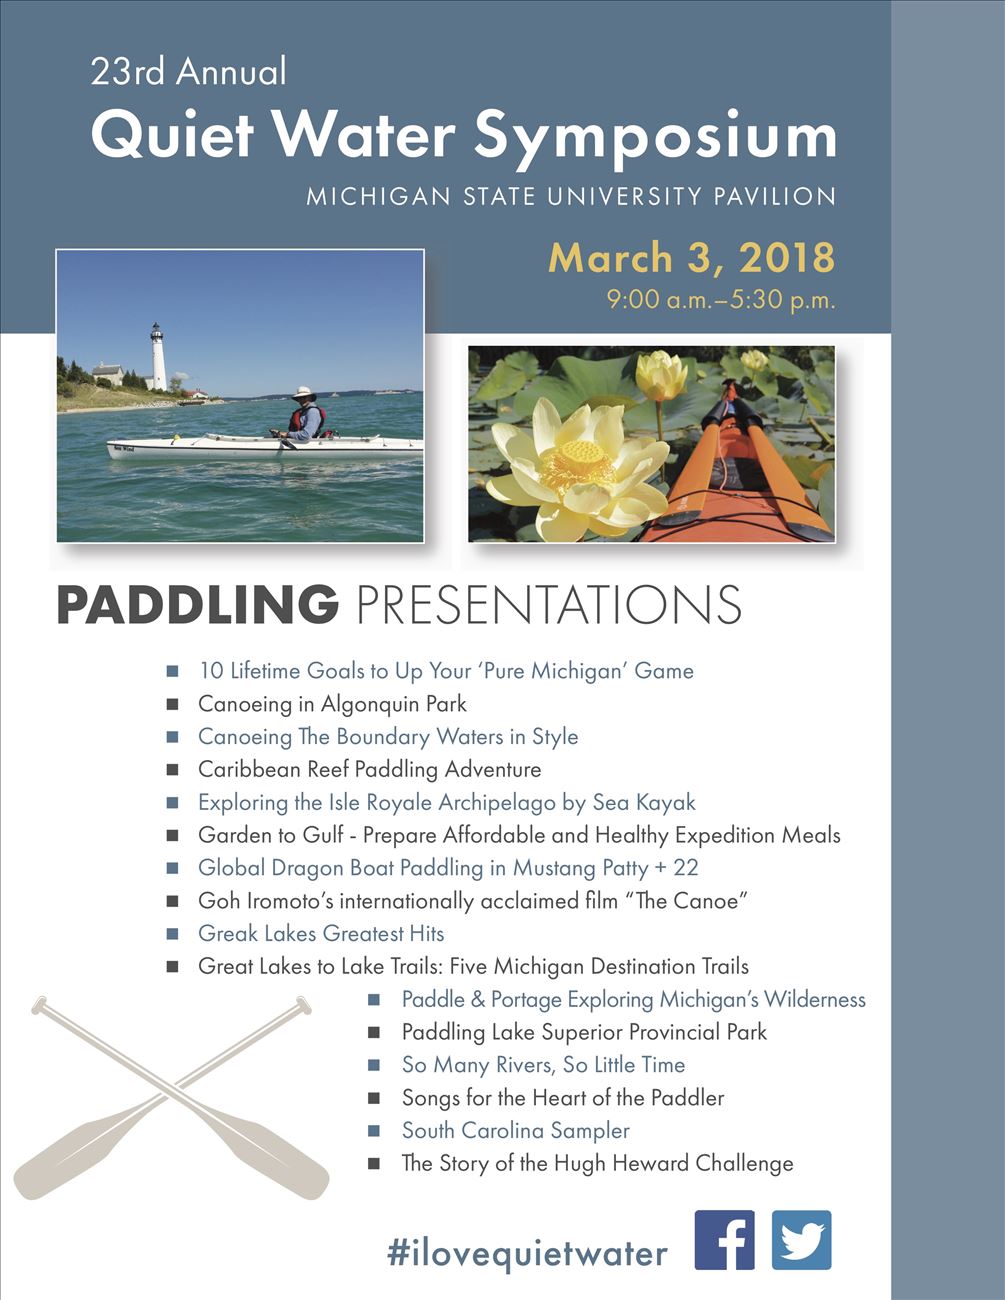 List of Paddling Presentations for the 2018 Quiet Water Symposium